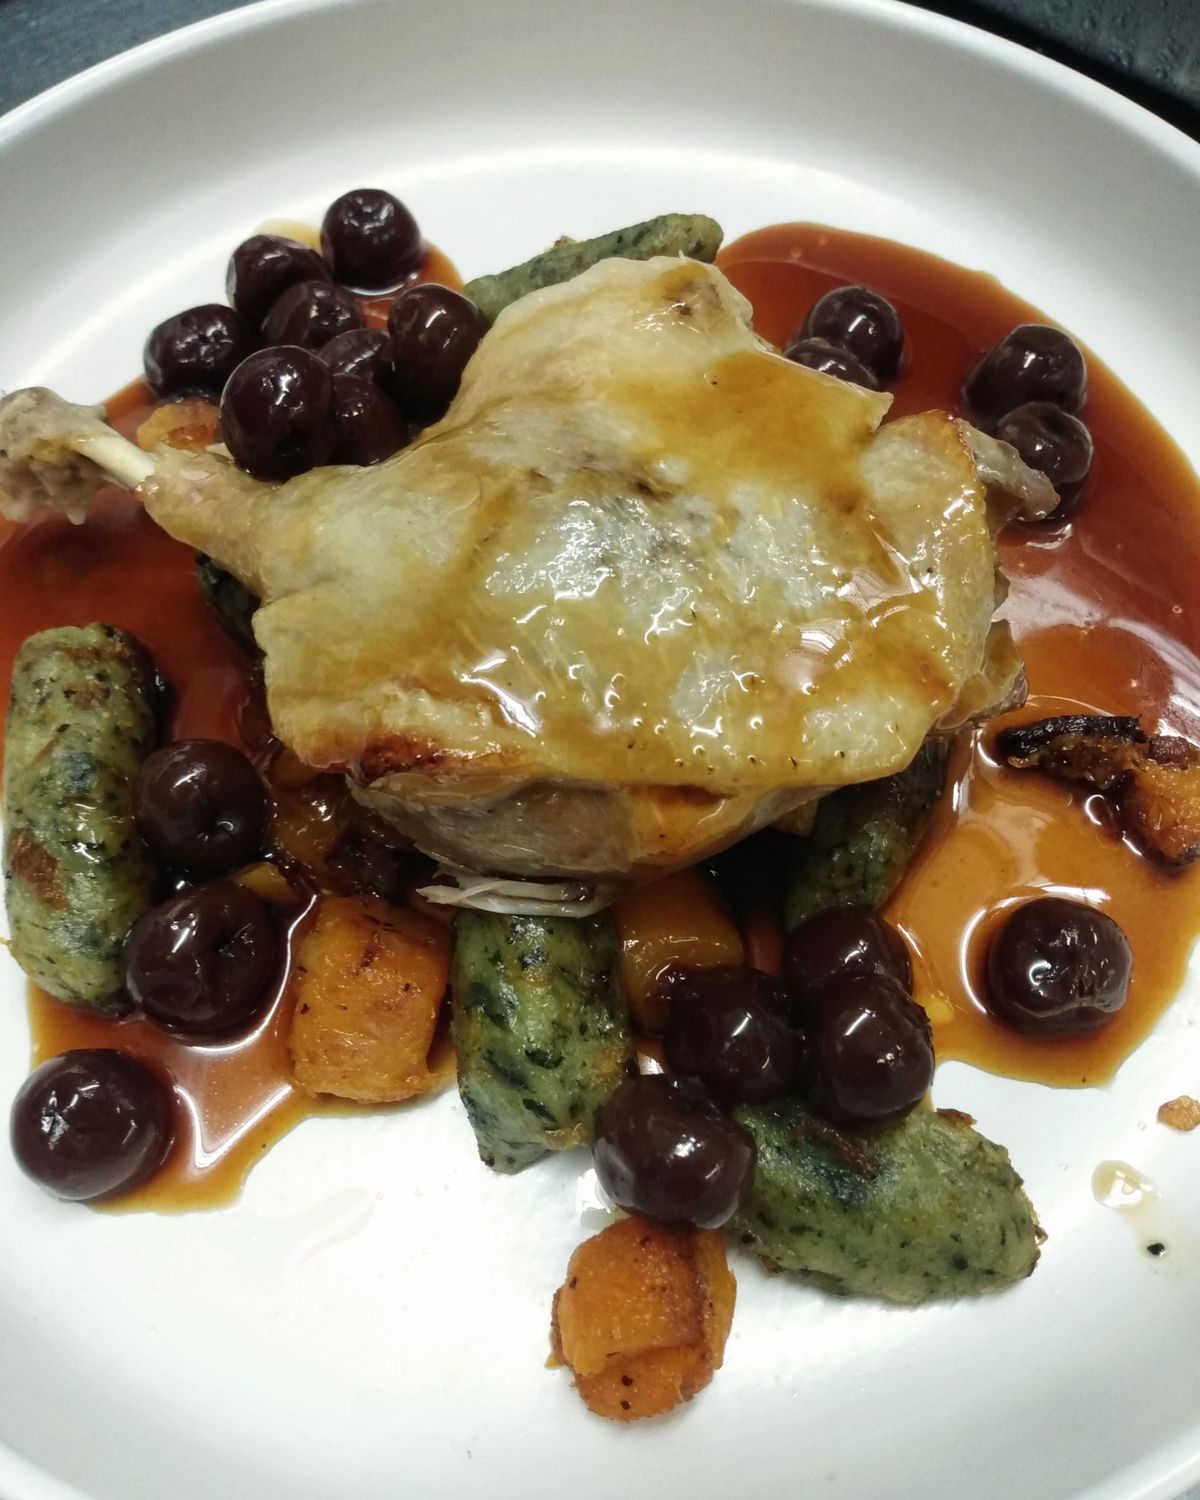 Duck leg confit with brandied cherry sauce and homemade spinach-goat cheese gnocchi.